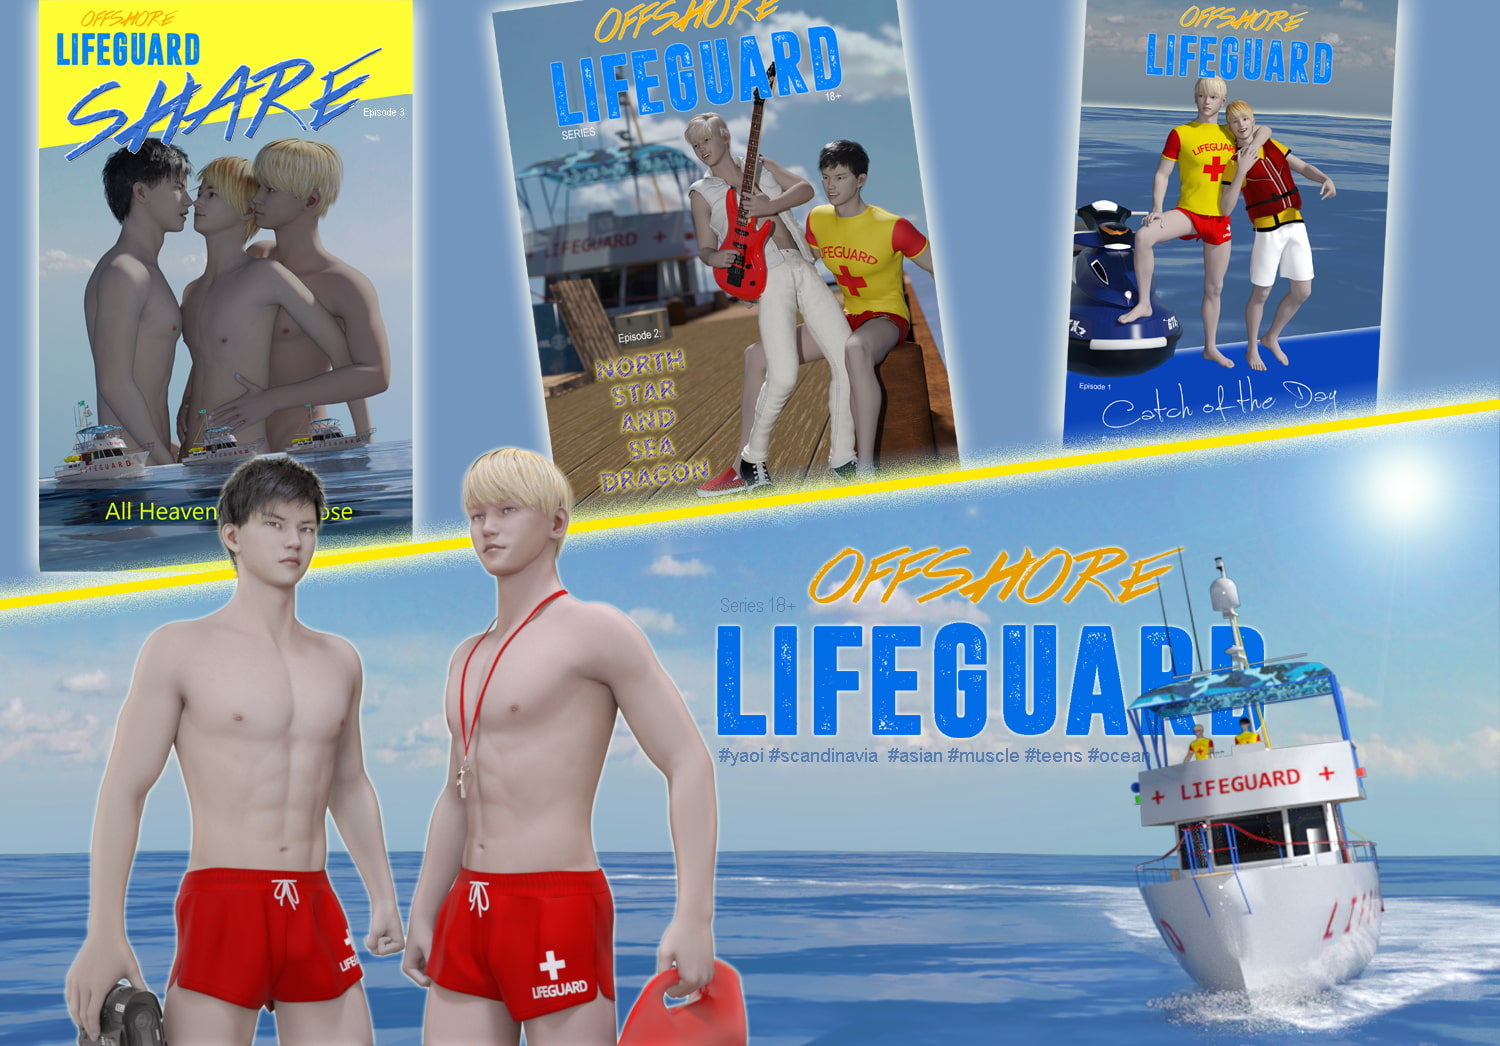 Offshore Lifeguard - Episode 1: Catch of the Day